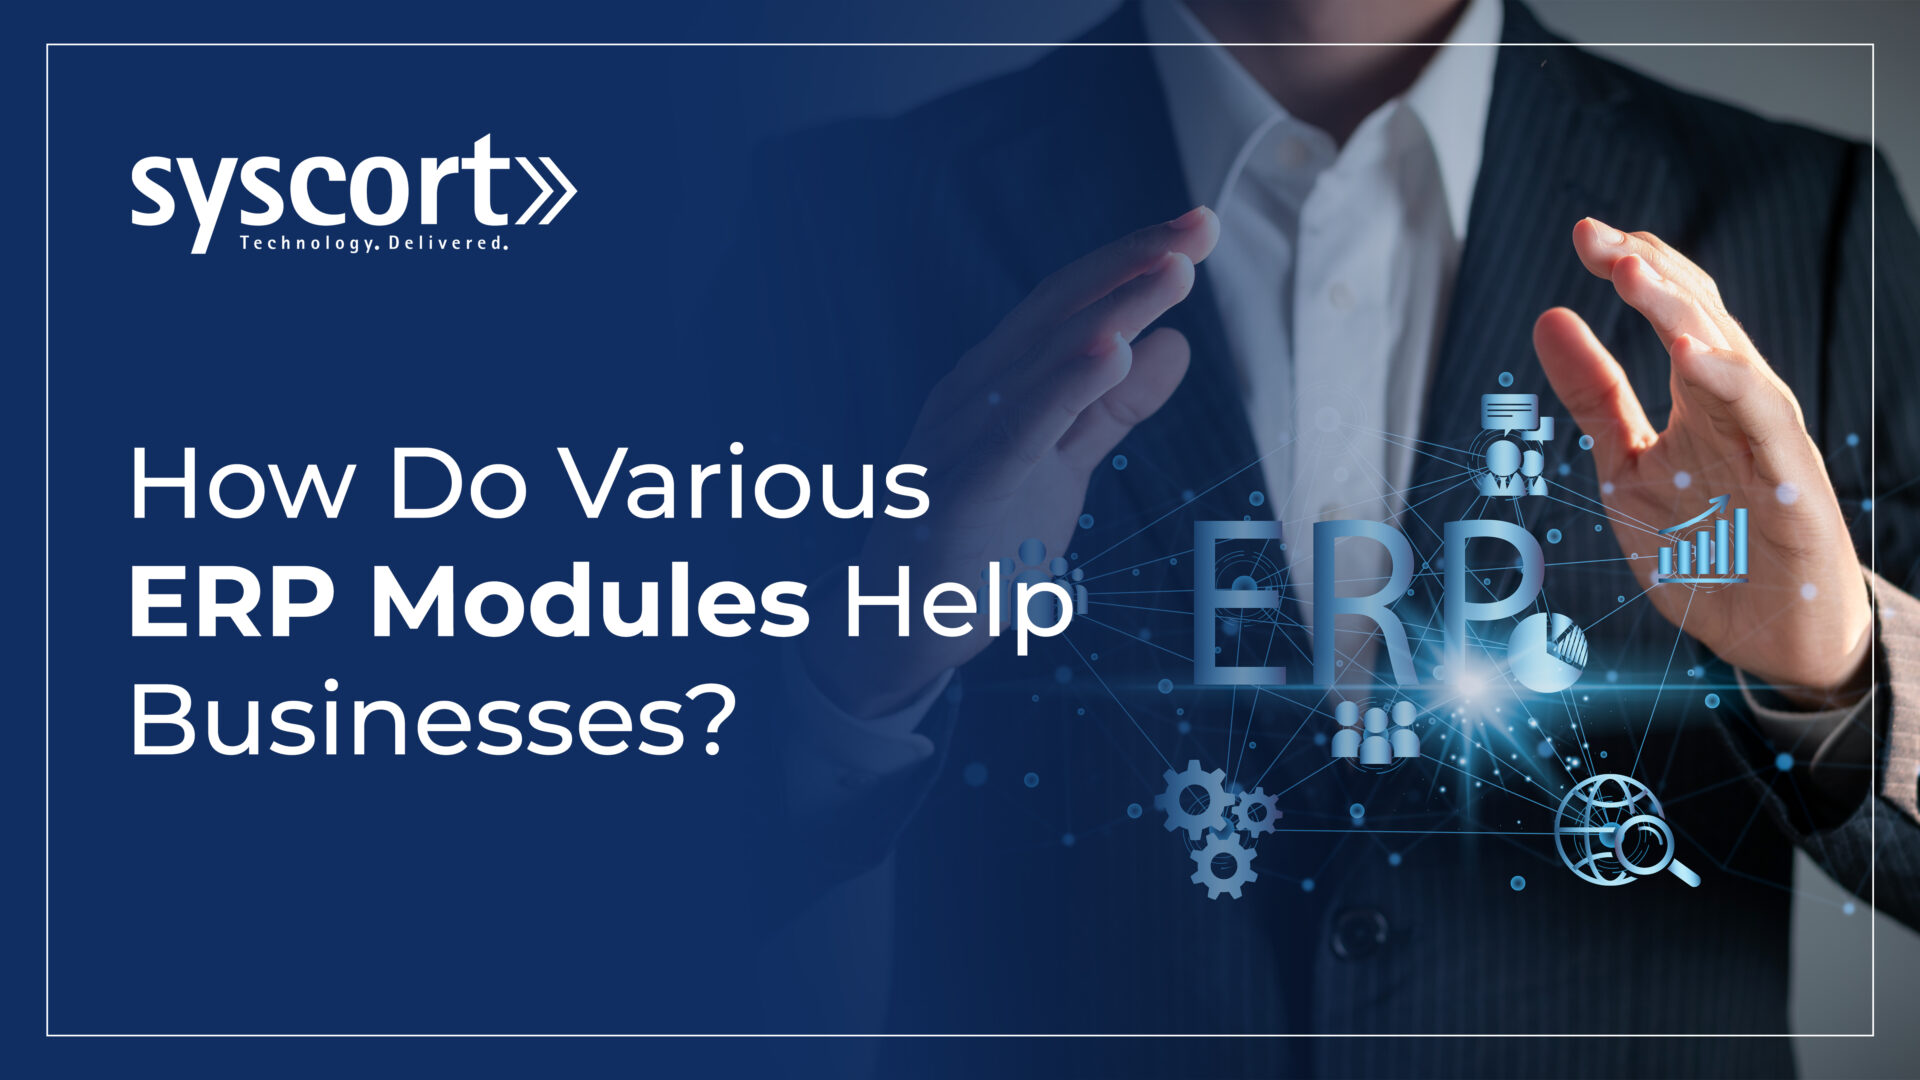 How Do Various ERP Modules Help Businesses?